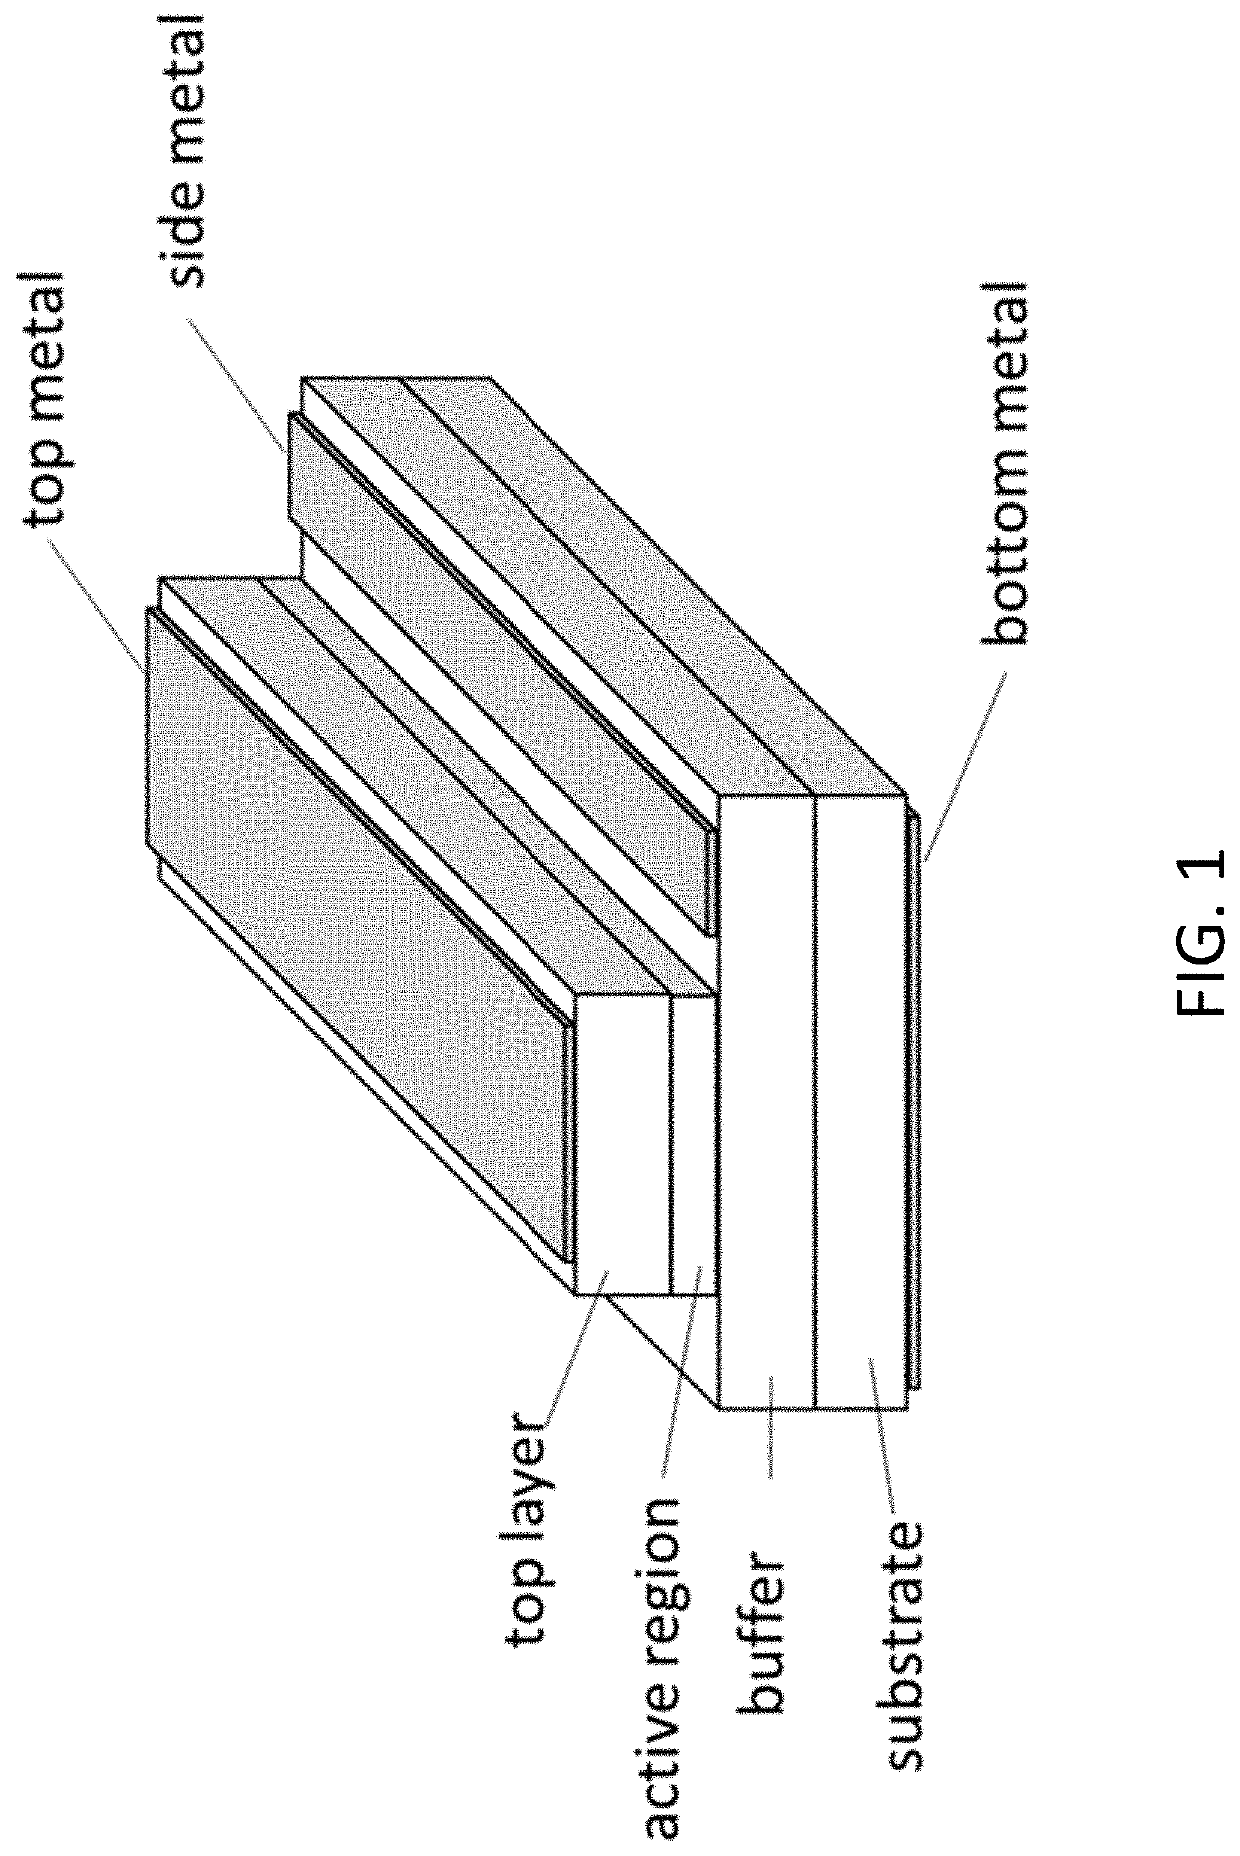 SiGeSn LASER DIODES AND METHOD OF FABRICATING SAME